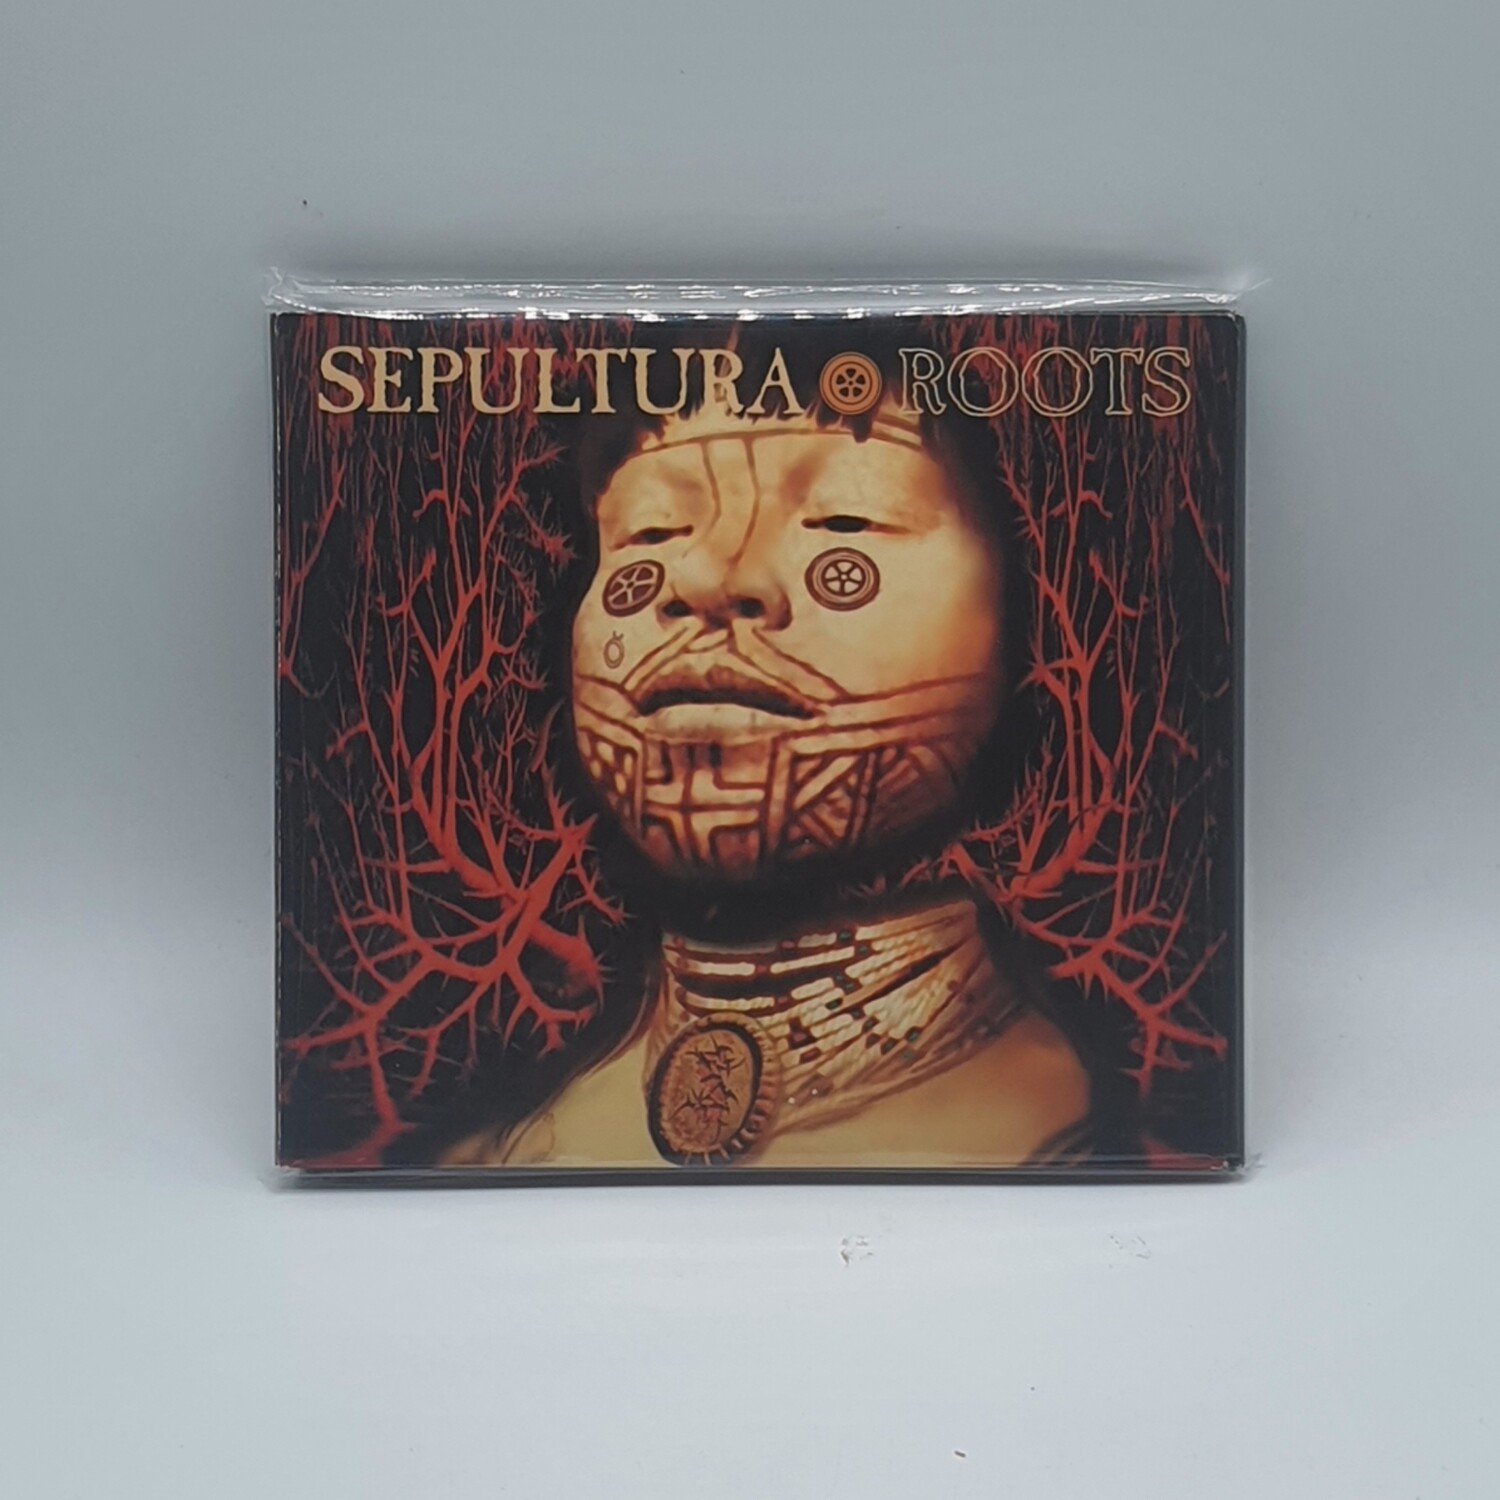 [USED] SEPULTURA -ROOTS- CD